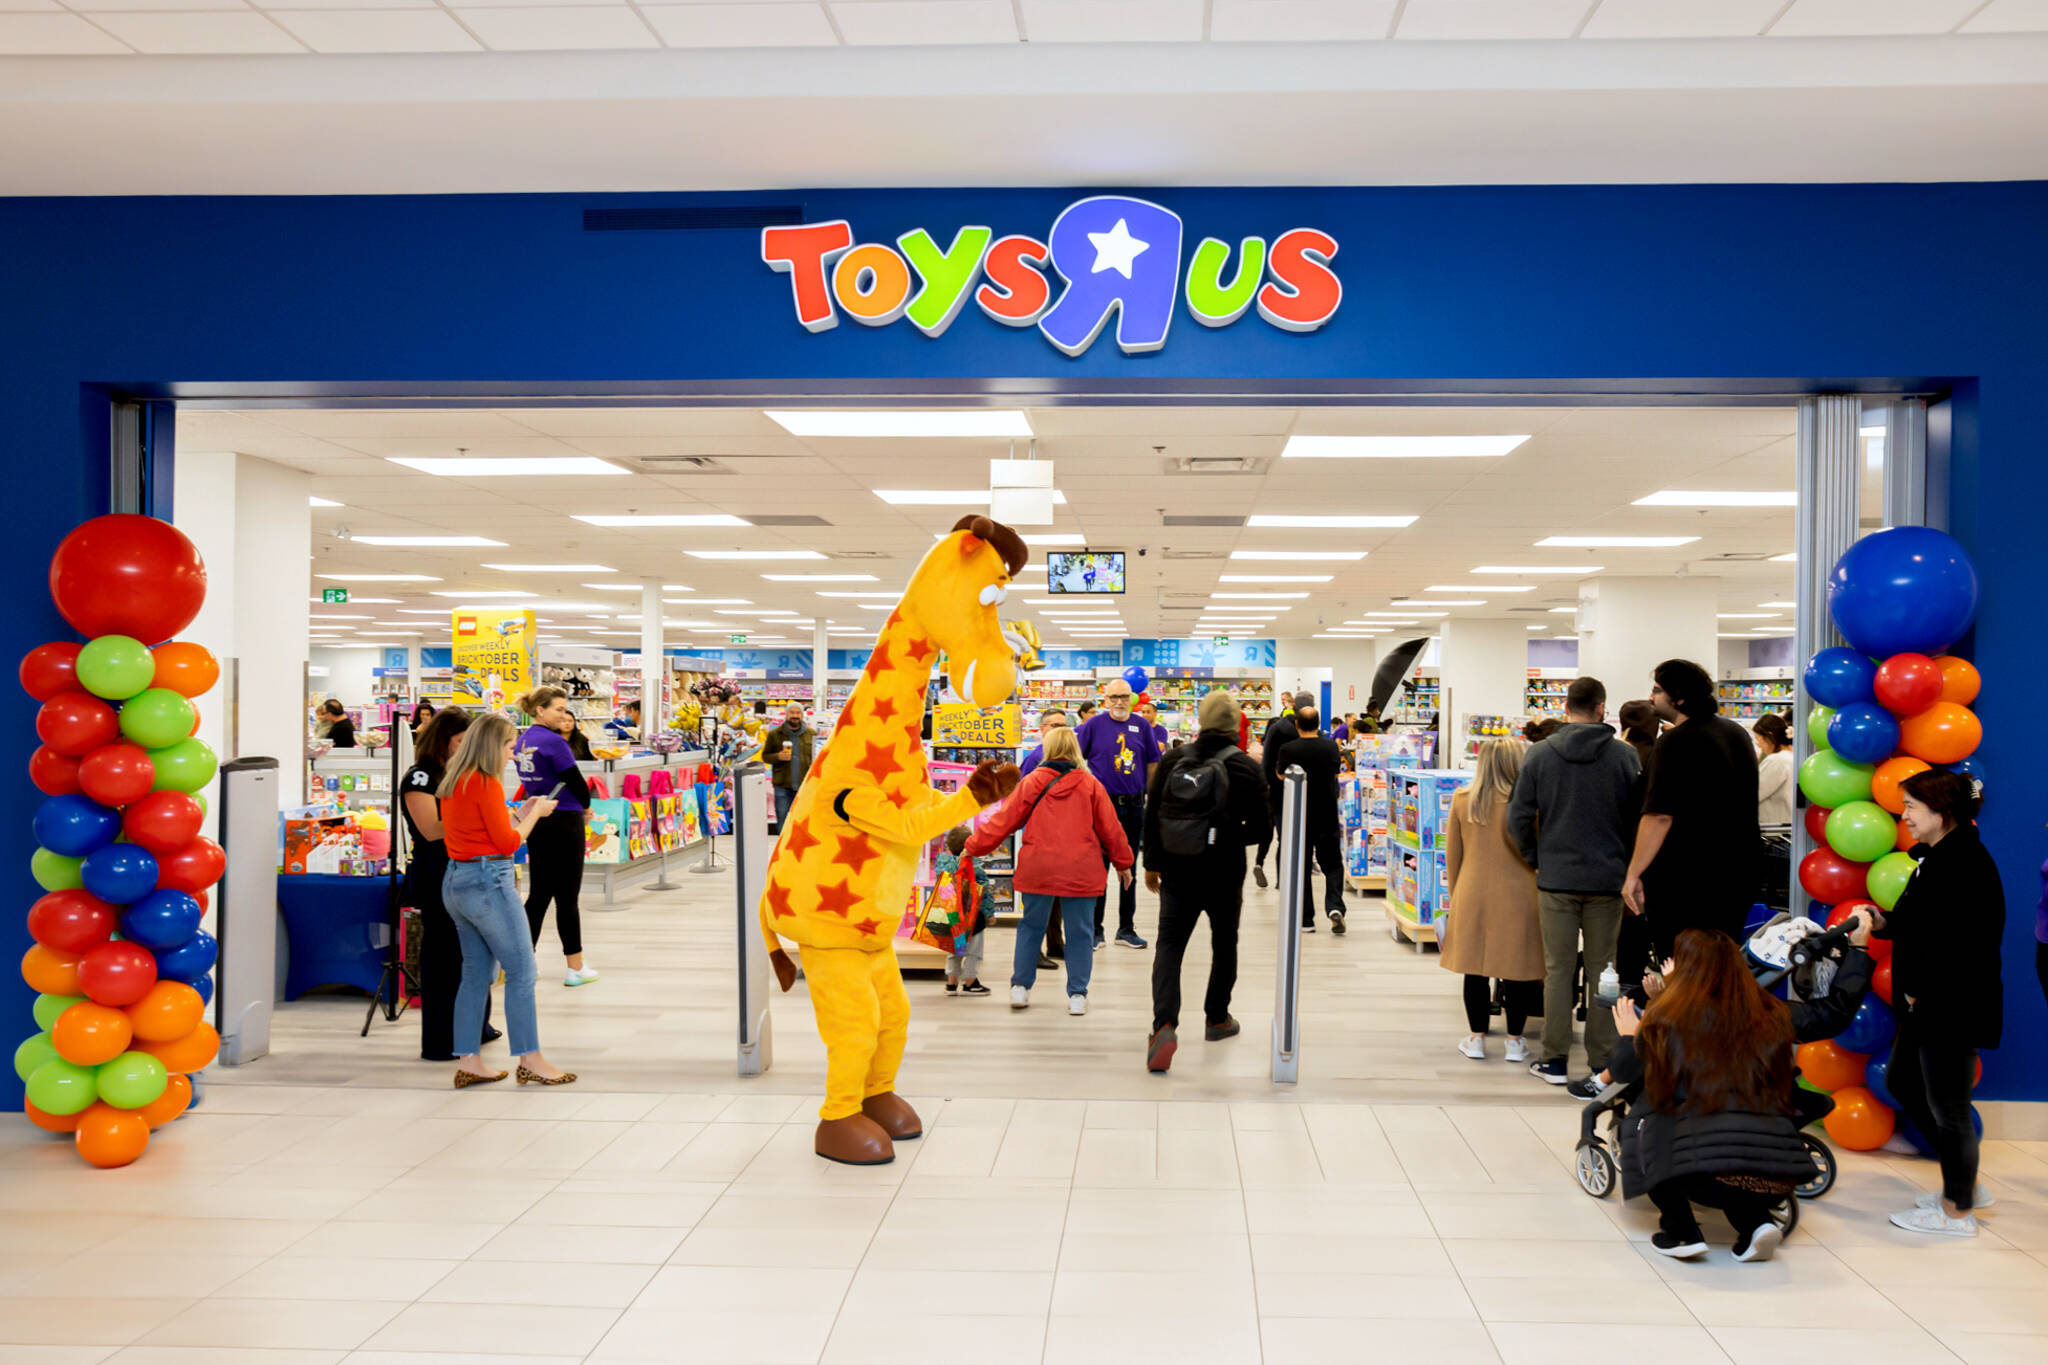 https://media.blogto.com/articles/2023101y-ToysRUs-12_1.jpg?w=2048&cmd=resize_then_crop&height=1365&quality=70